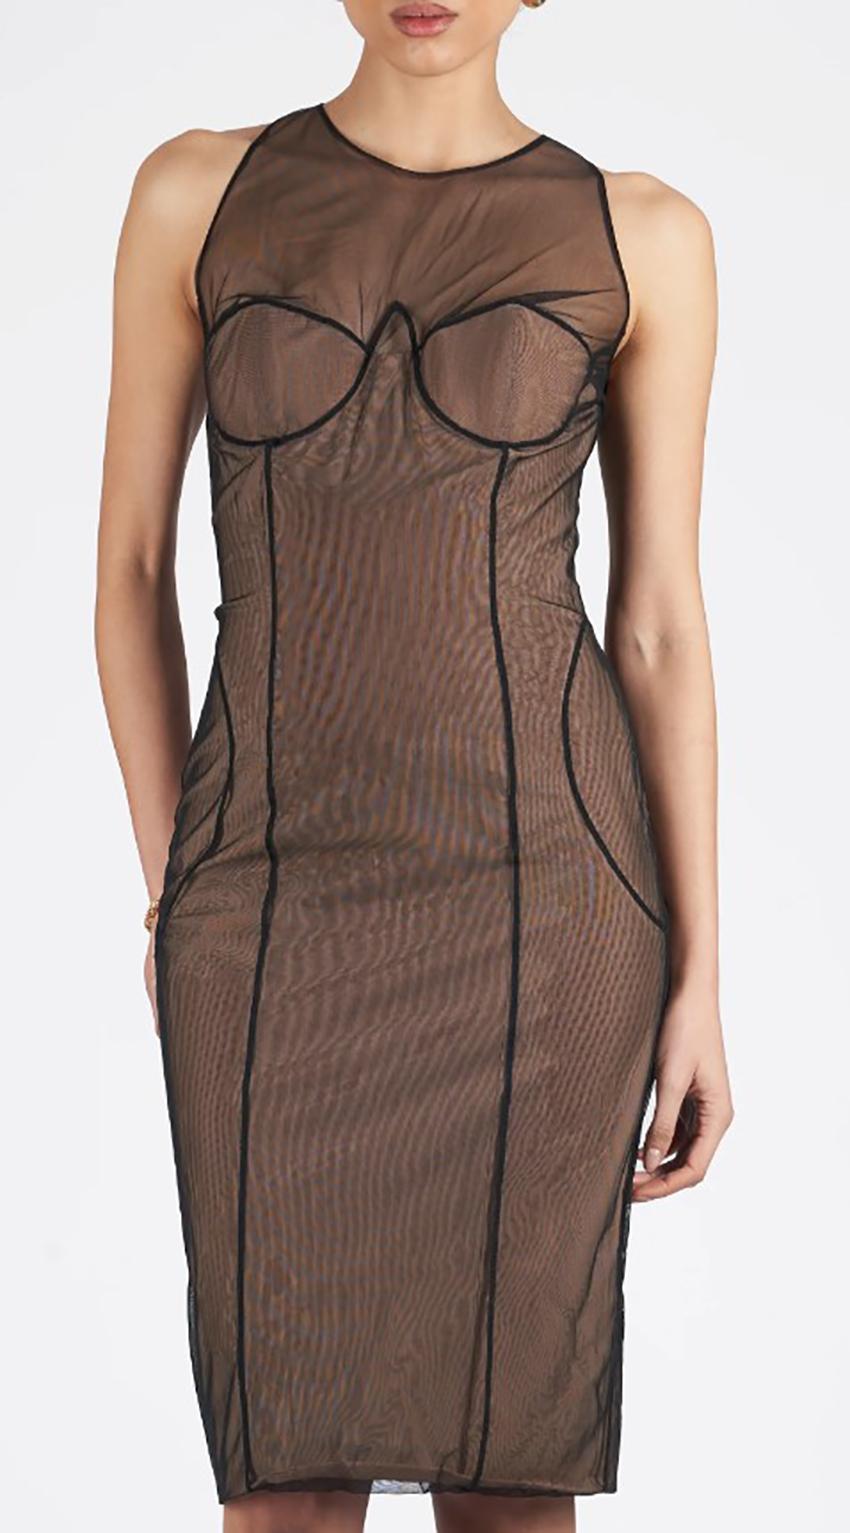 S/S 2001 TOM FORD for GUCCI VINTAGE NUDE/BLACK MESH DRESS IT 42 - US 6 1